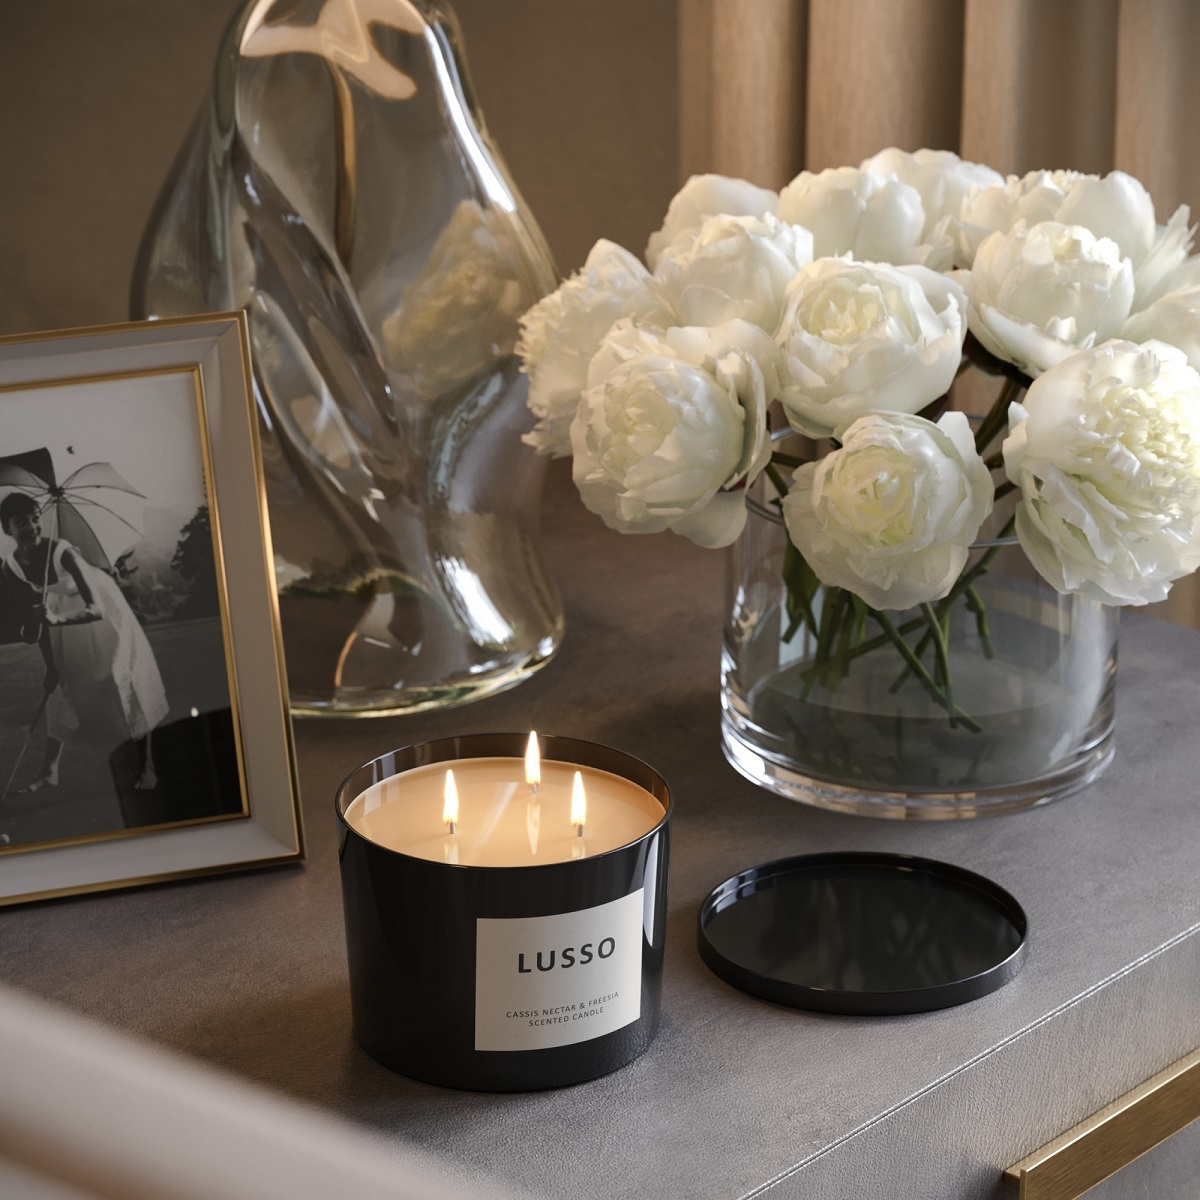 scented three wick candle glowing on a sidetable with flowers and picture frame